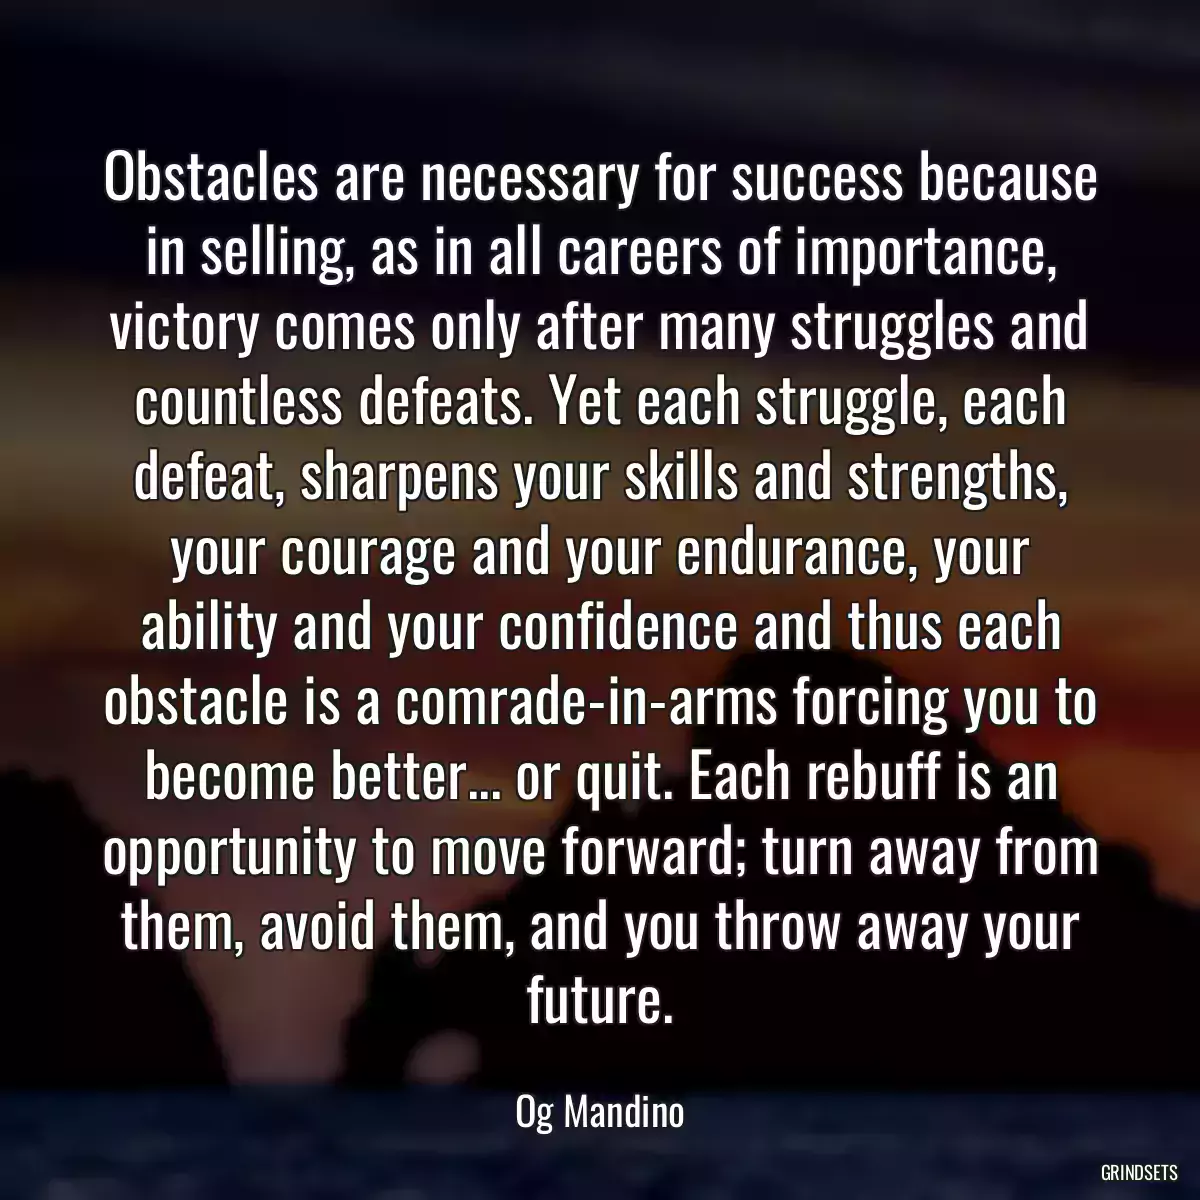 Obstacles are necessary for success because in selling, as in all careers of importance, victory comes only after many struggles and countless defeats. Yet each struggle, each defeat, sharpens your skills and strengths, your courage and your endurance, your ability and your confidence and thus each obstacle is a comrade-in-arms forcing you to become better... or quit. Each rebuff is an opportunity to move forward; turn away from them, avoid them, and you throw away your future.